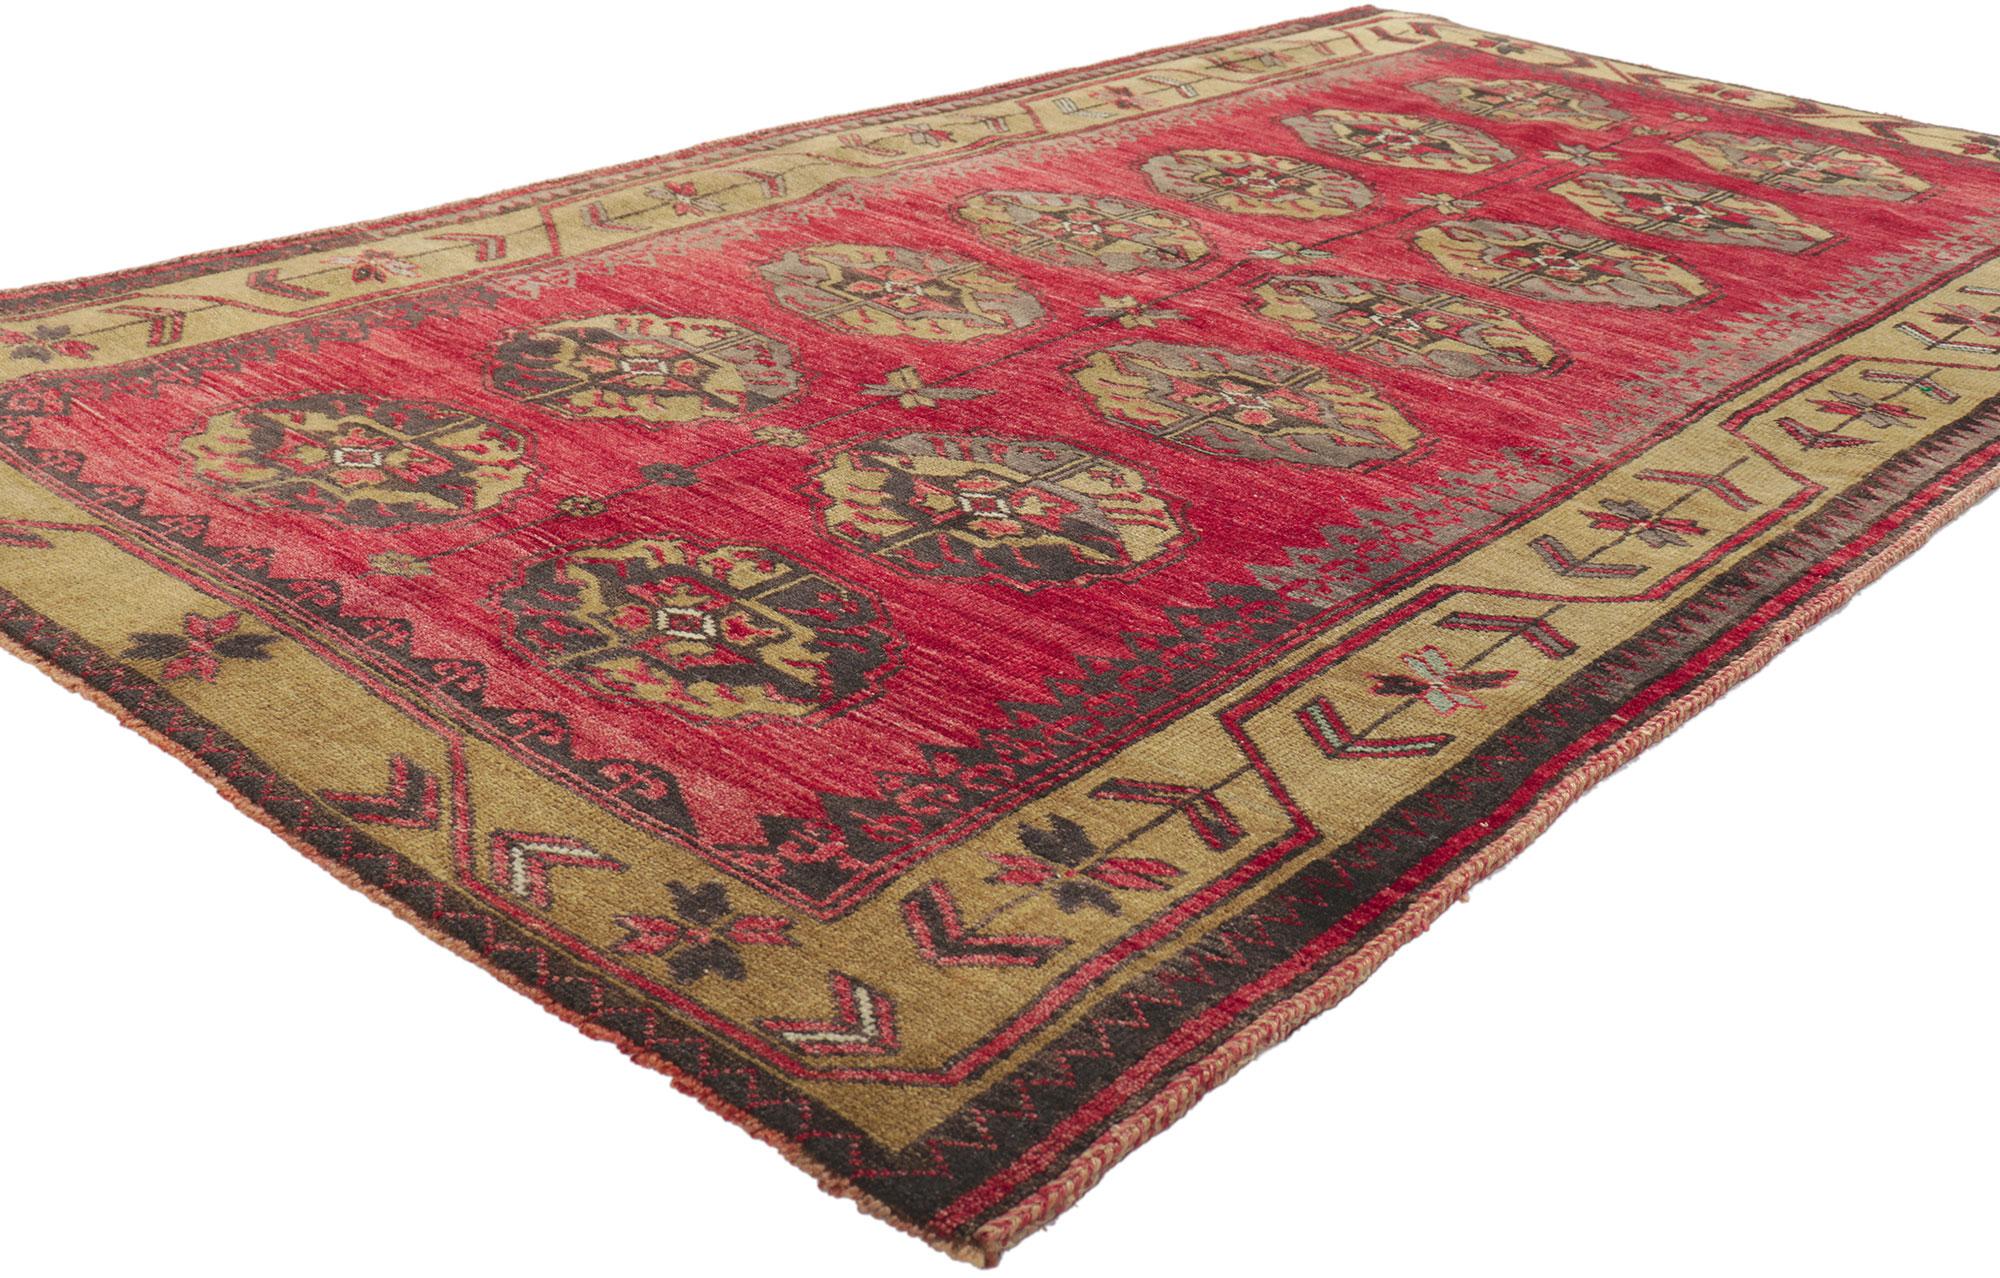 52382 Vintage Turkish Oushak Rug, 04'00 x 07'00.
Regal and stately, this hand knotted wool vintage Turkish Oushak rug is the perfect complement to virtually nearly any interior it graces. The straight repeat of octagonal motifs and rich, sumptuous